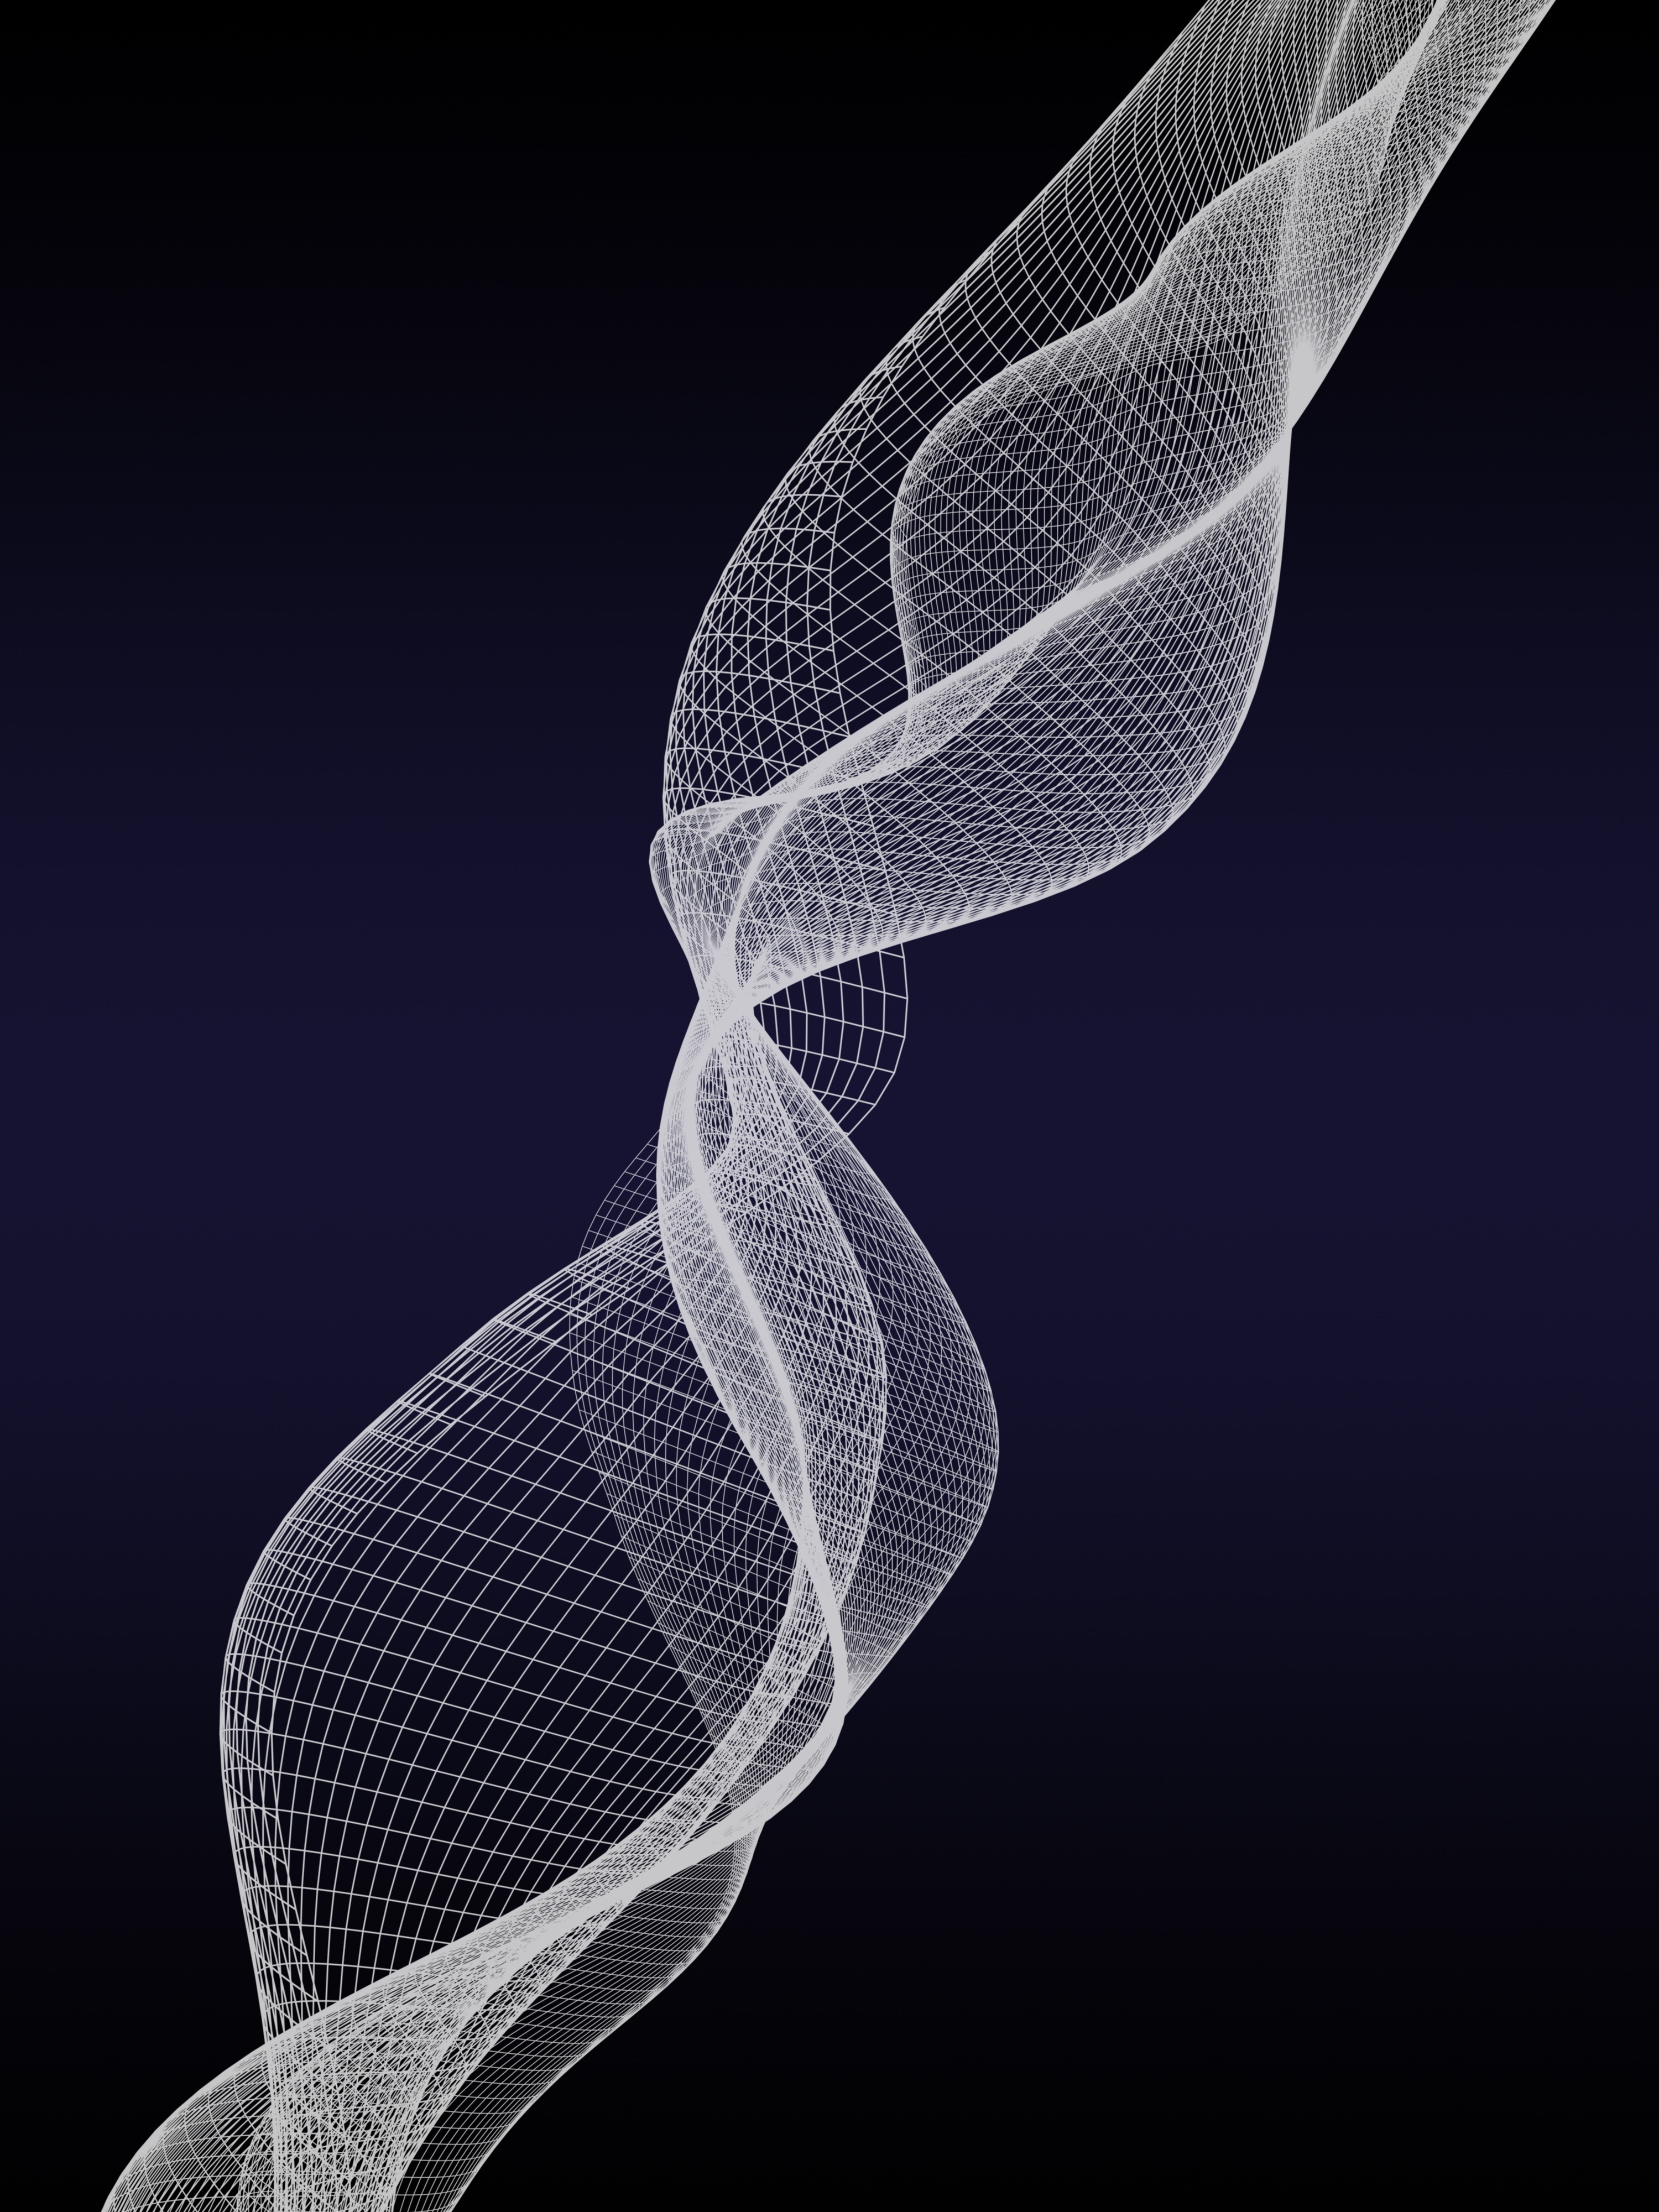 Wallpaper for mobile devices net, plexus, wavy, abstract